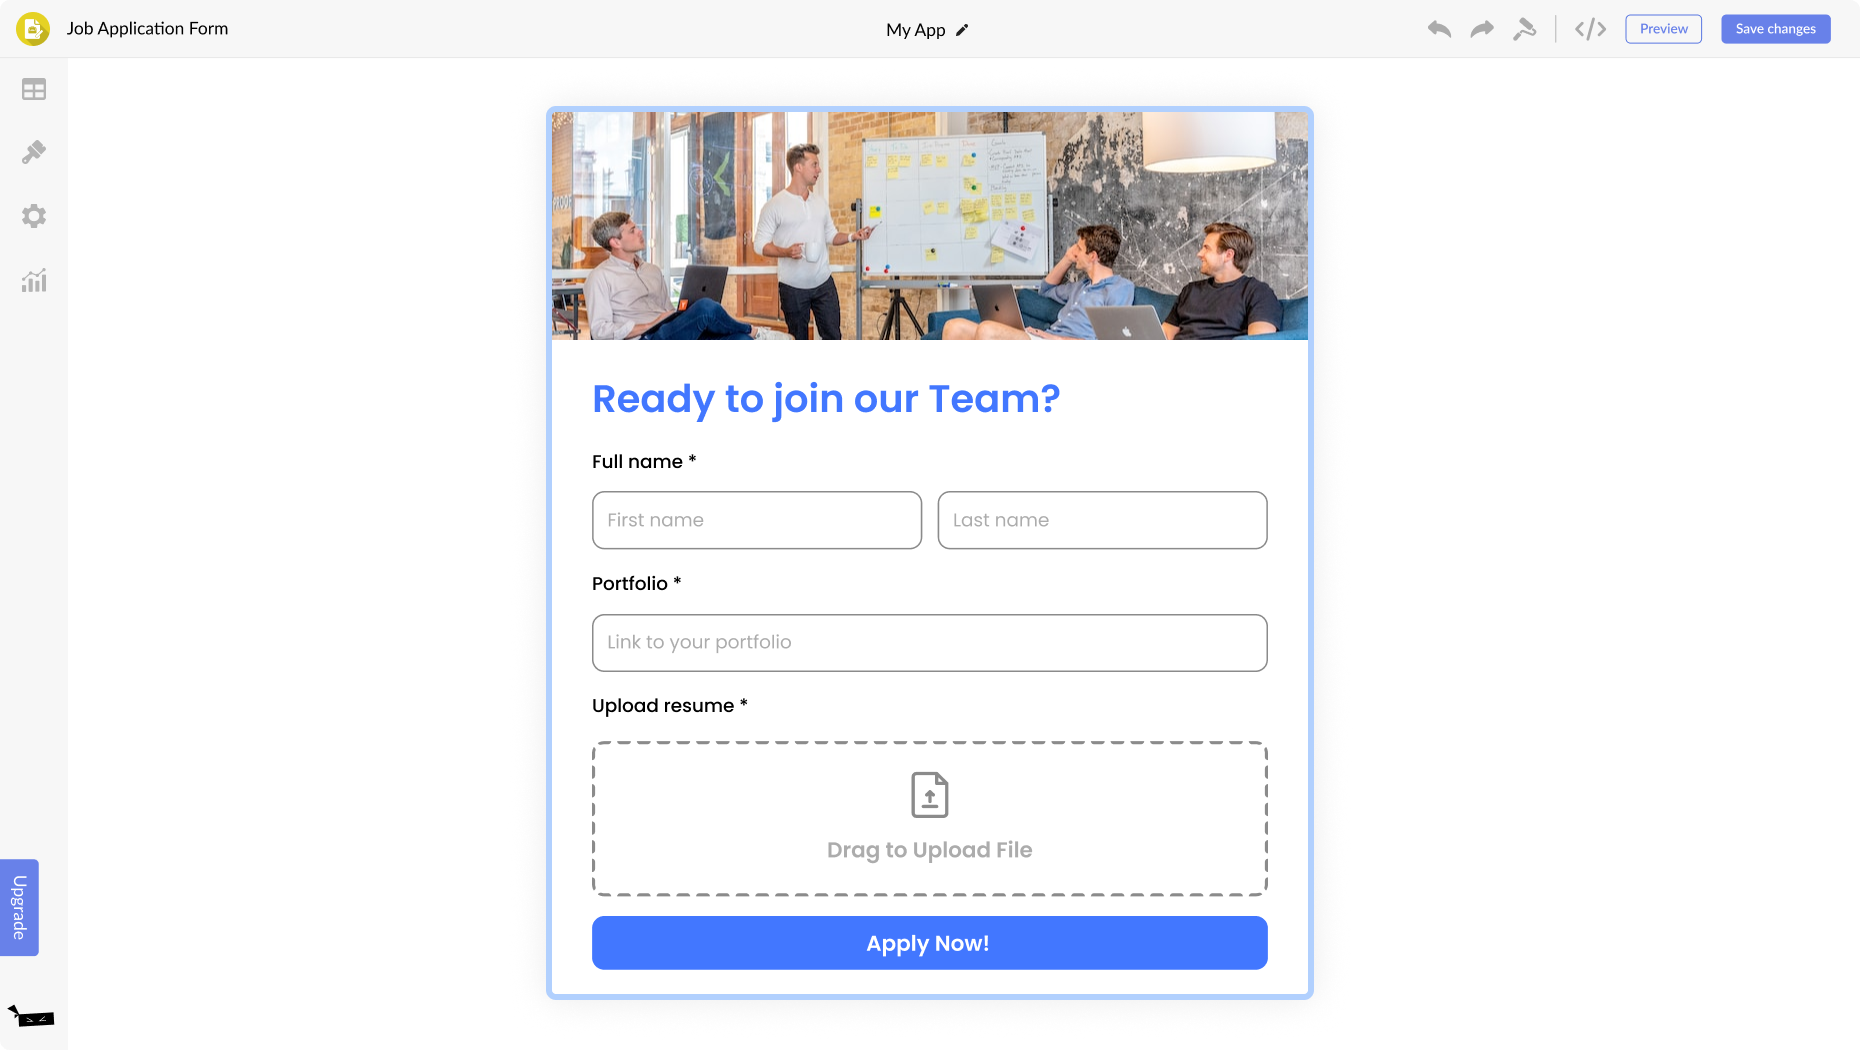 Job Application Form for Shopify